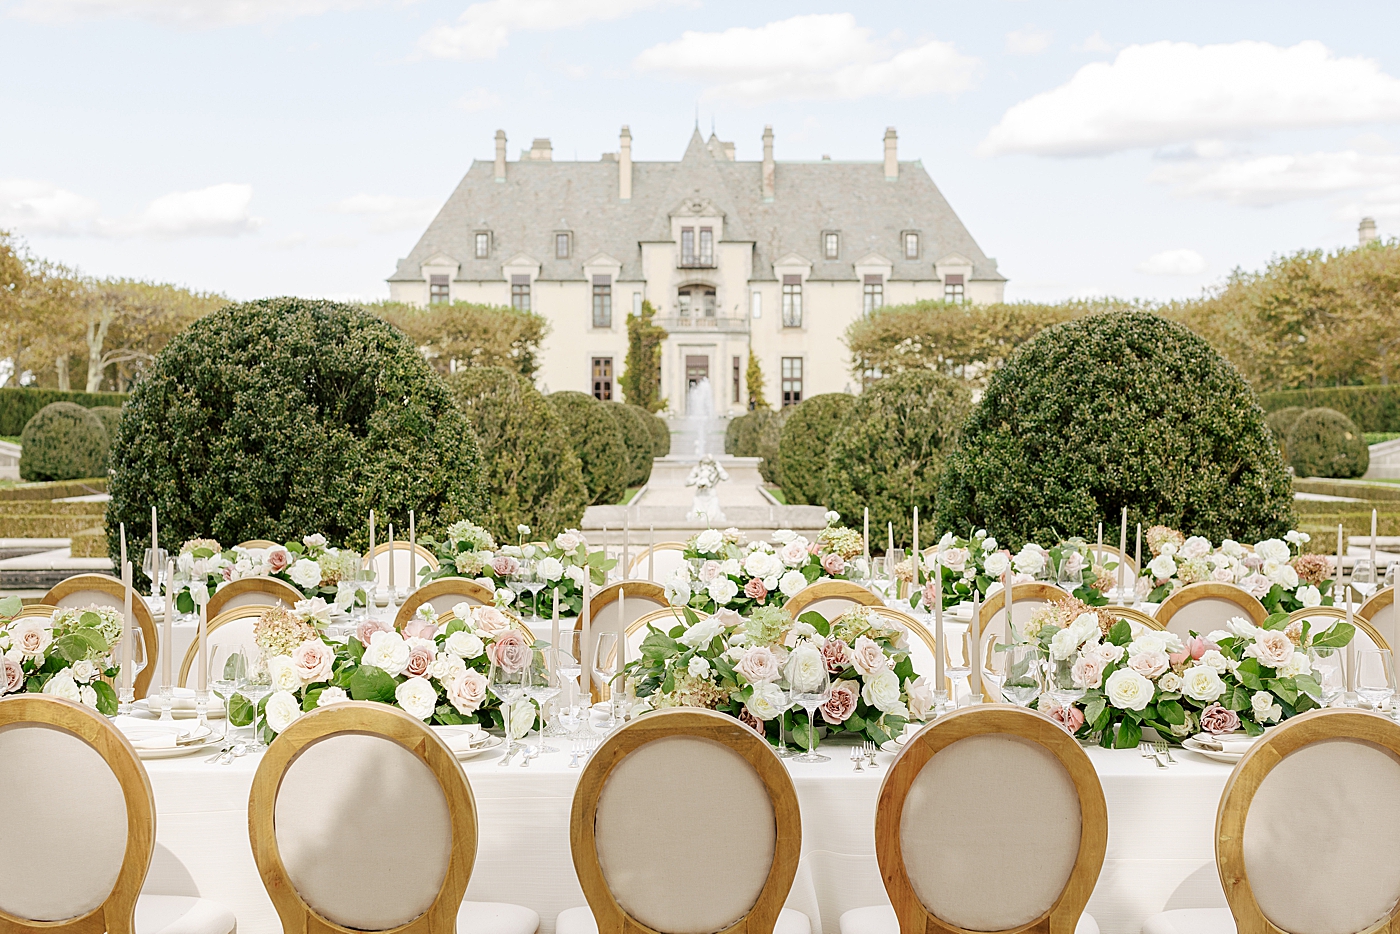 Details of a table setting with white flowers and white table cloths in a European garden during Oheka castle wedding | Image by Hope Helmuth Photography